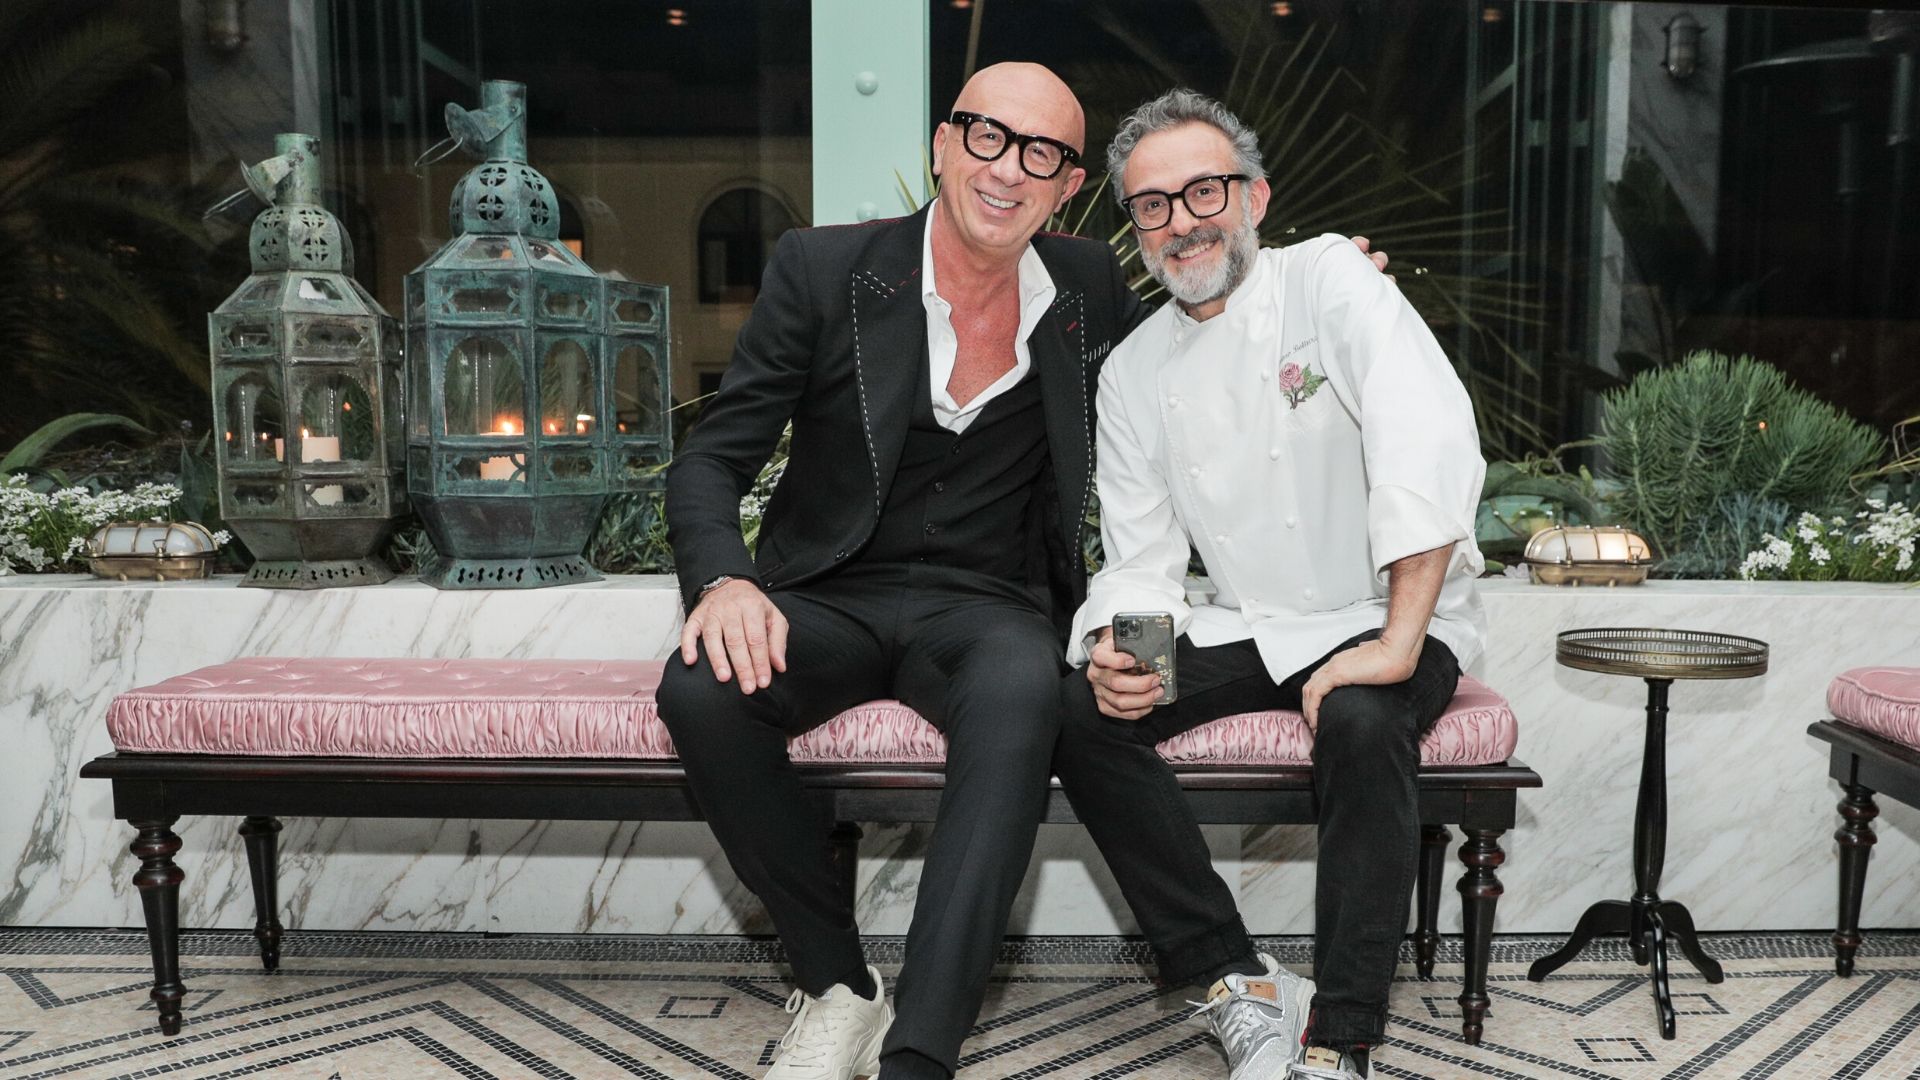 Bar Soldat Antibiotika Esquire cover star Massimo Bottura is the latest guest on the Gucci Podcast  | Esquire Middle East – The Region's Best Men's Magazine